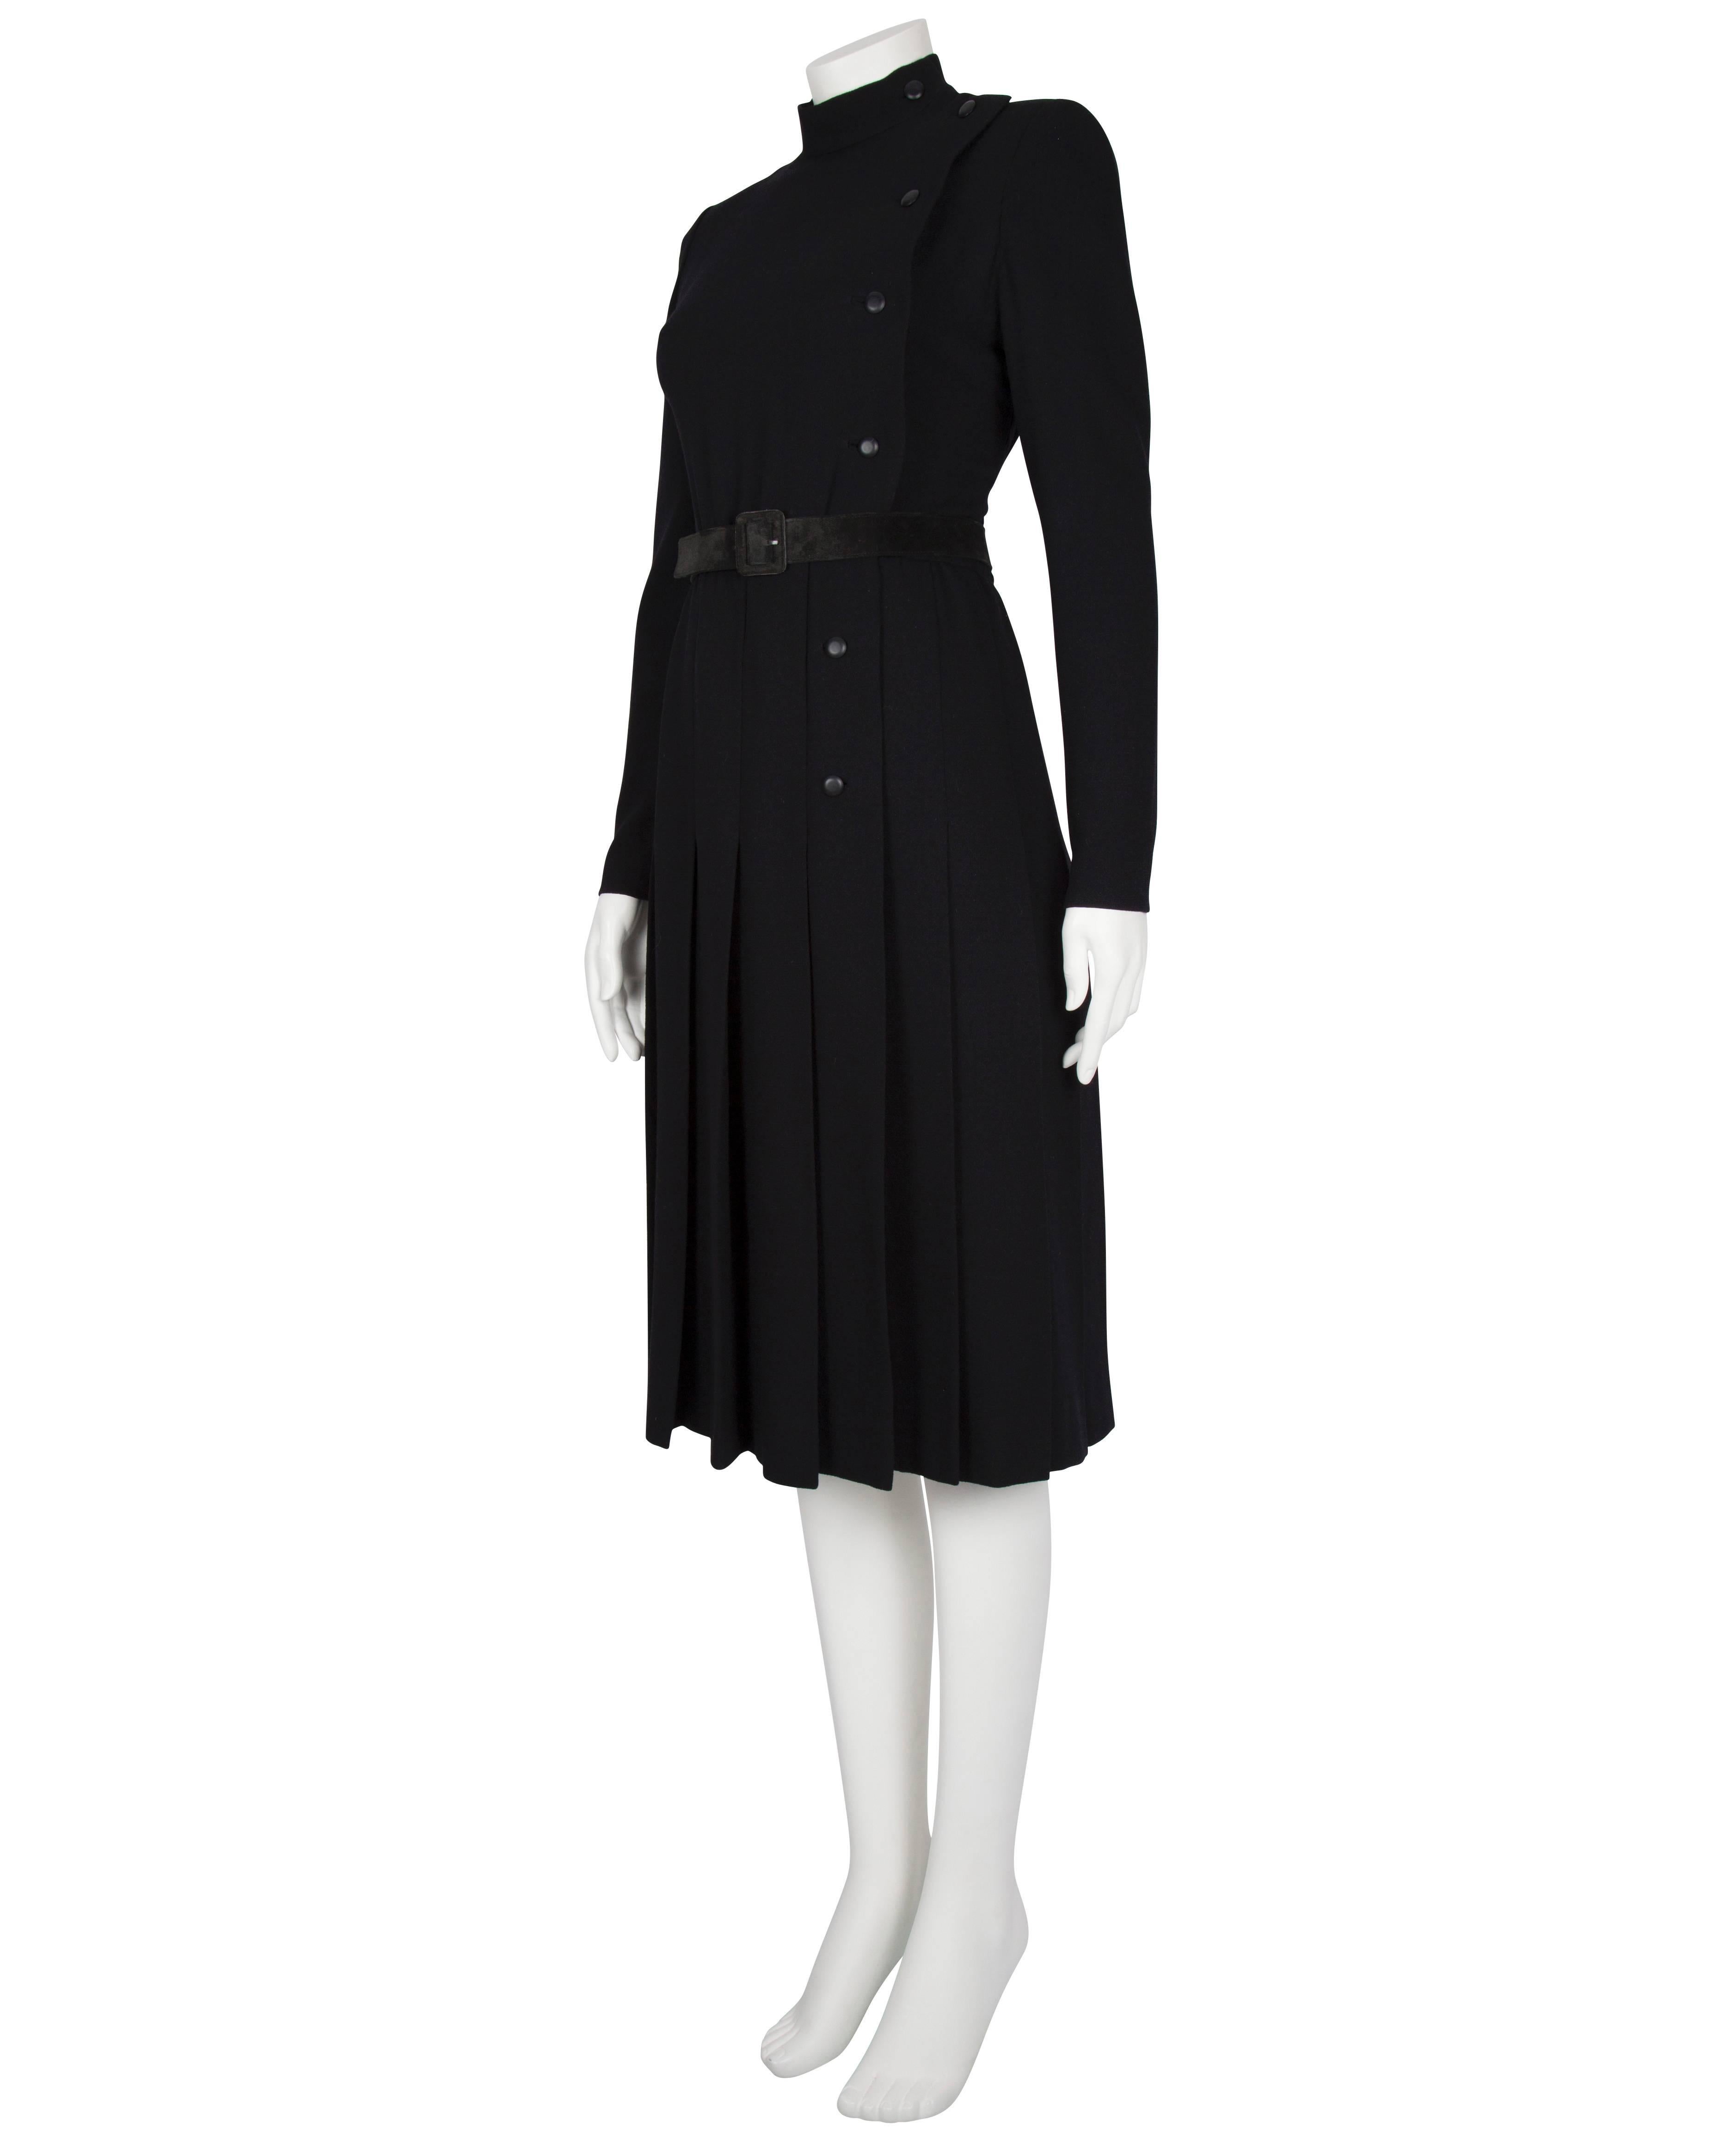 A/W 1979 Dior Couture Black Silk Crepe Button-Down Wrap Dress with Suede Belt For Sale 2